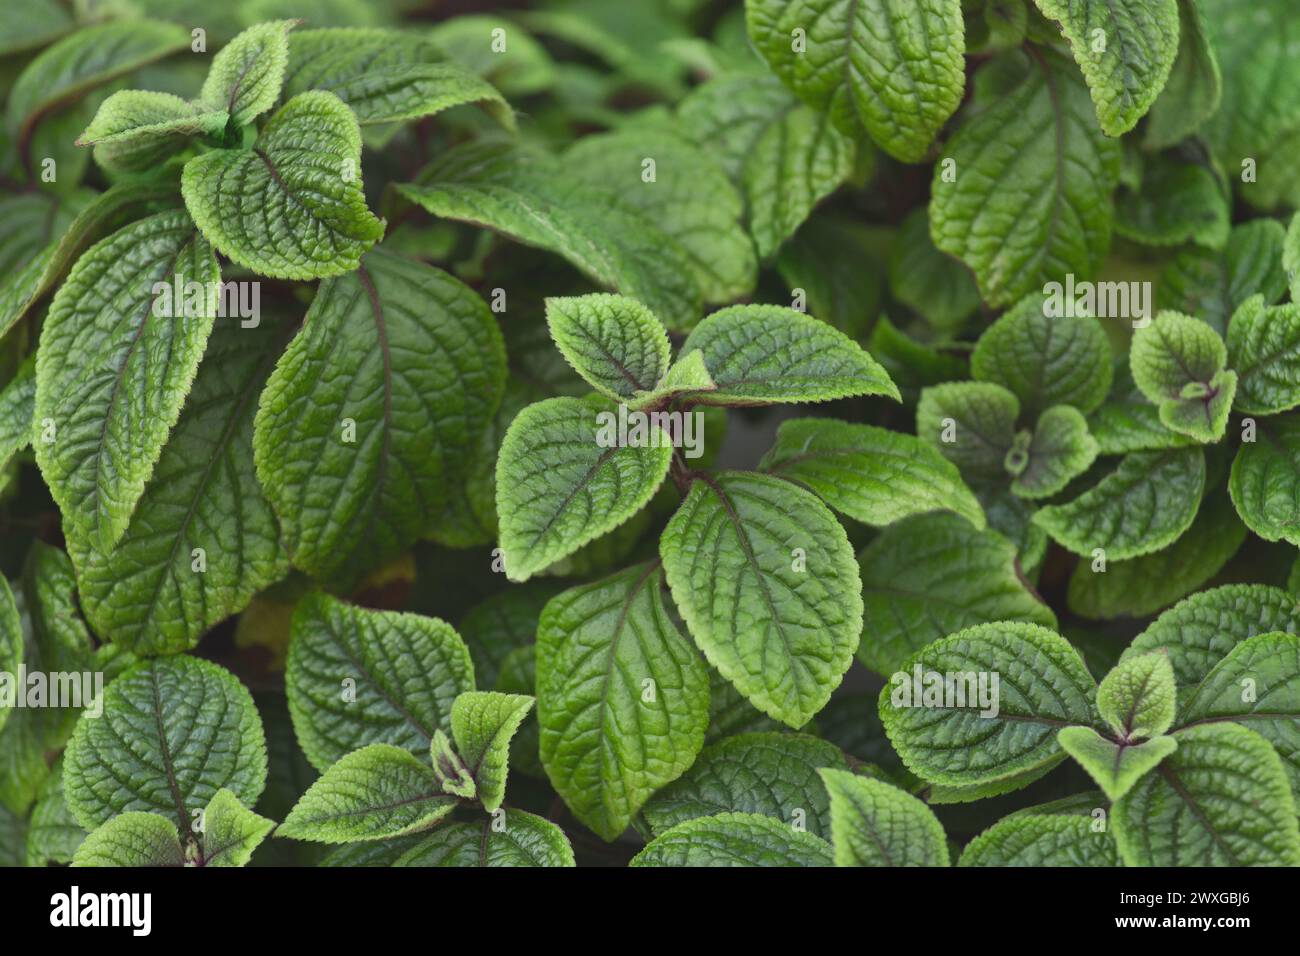 Plectranthus coleus green natural leaves mint nature plant background abstract. Stock Photo